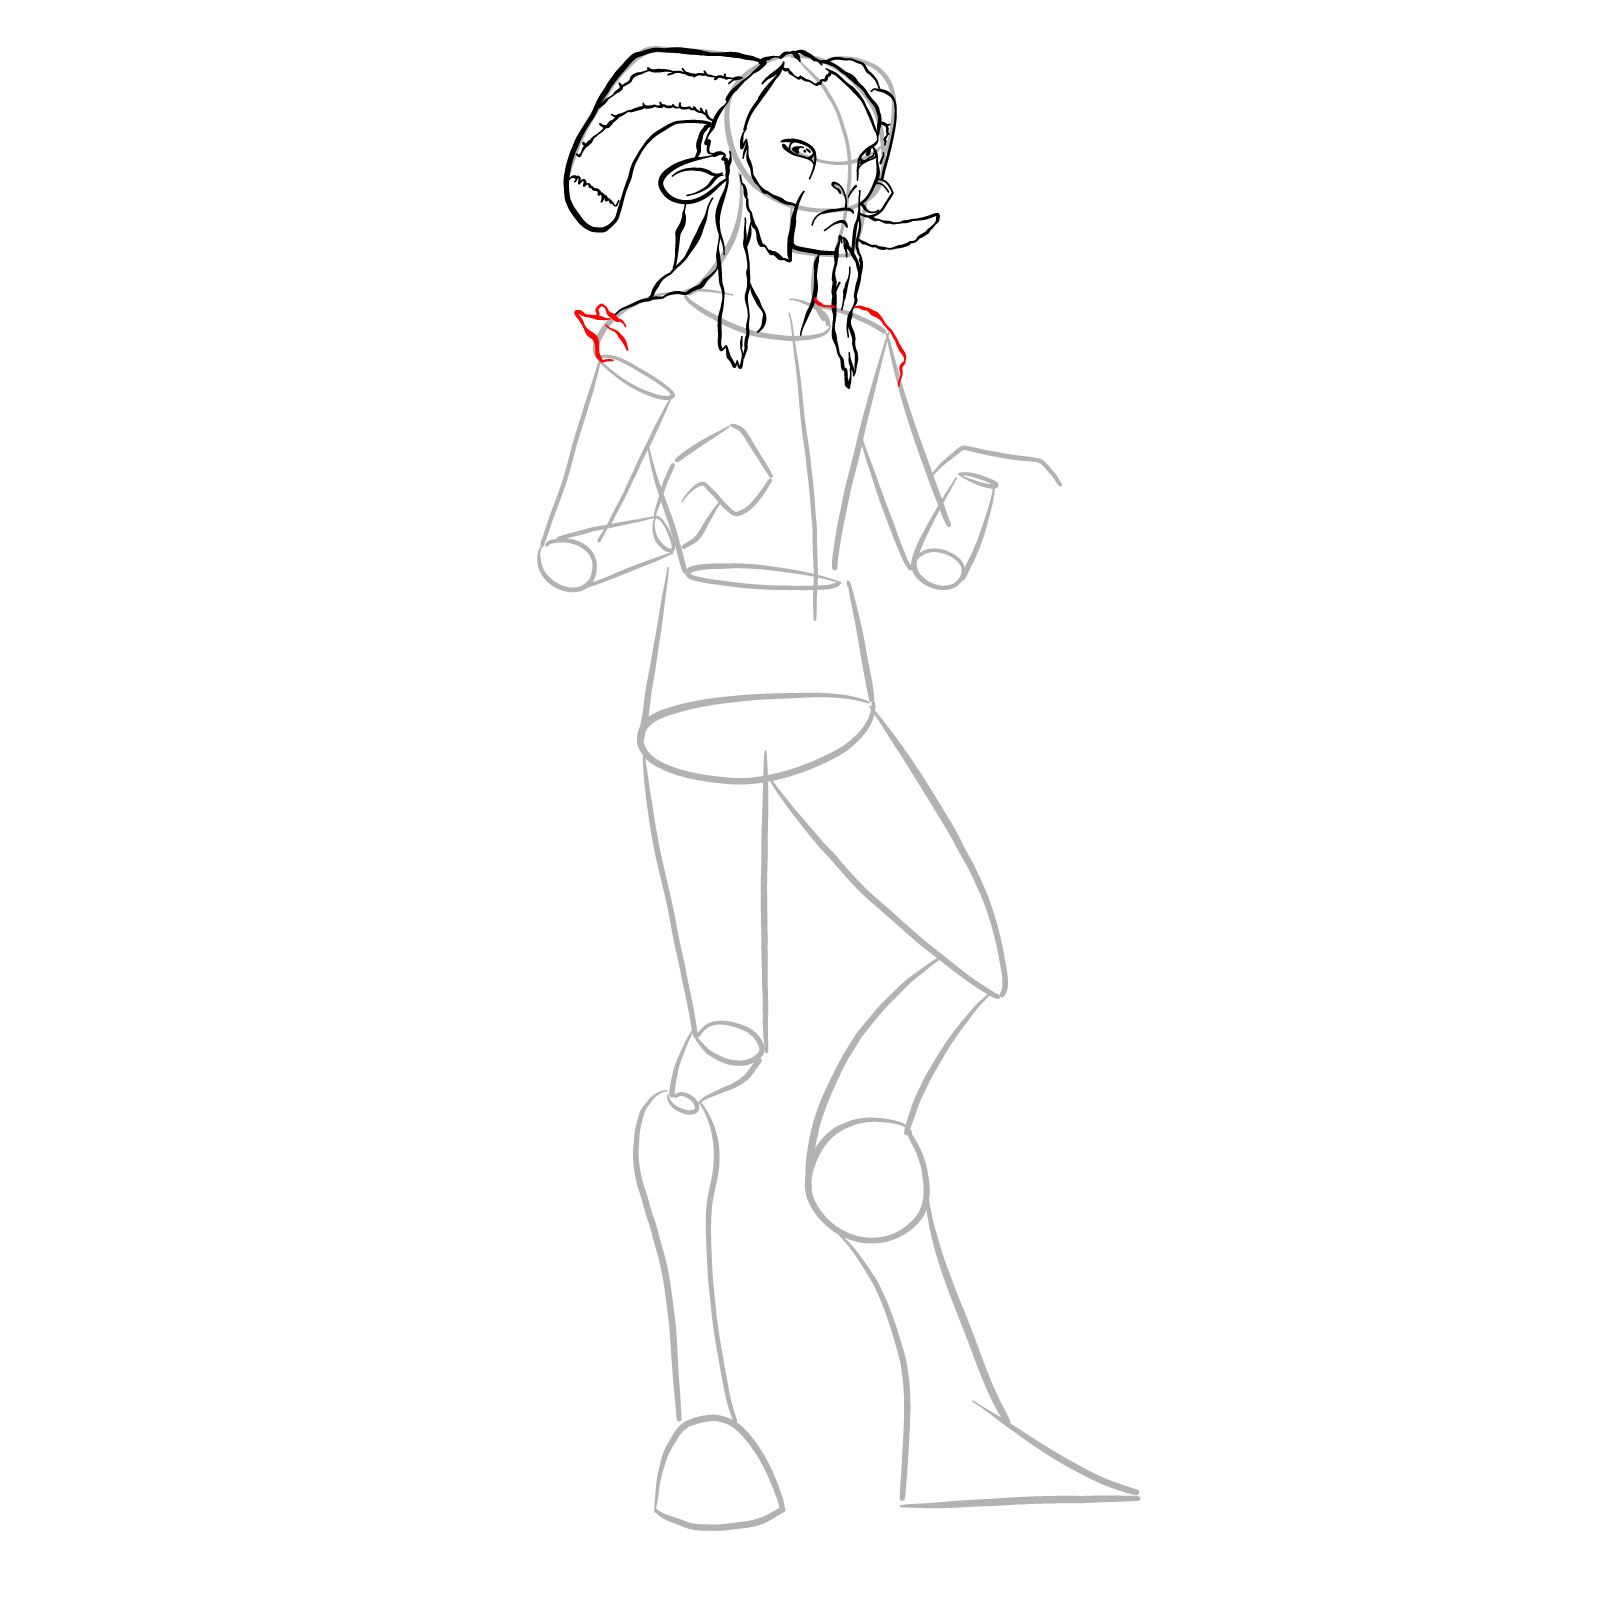 How to draw a Faun - step 15